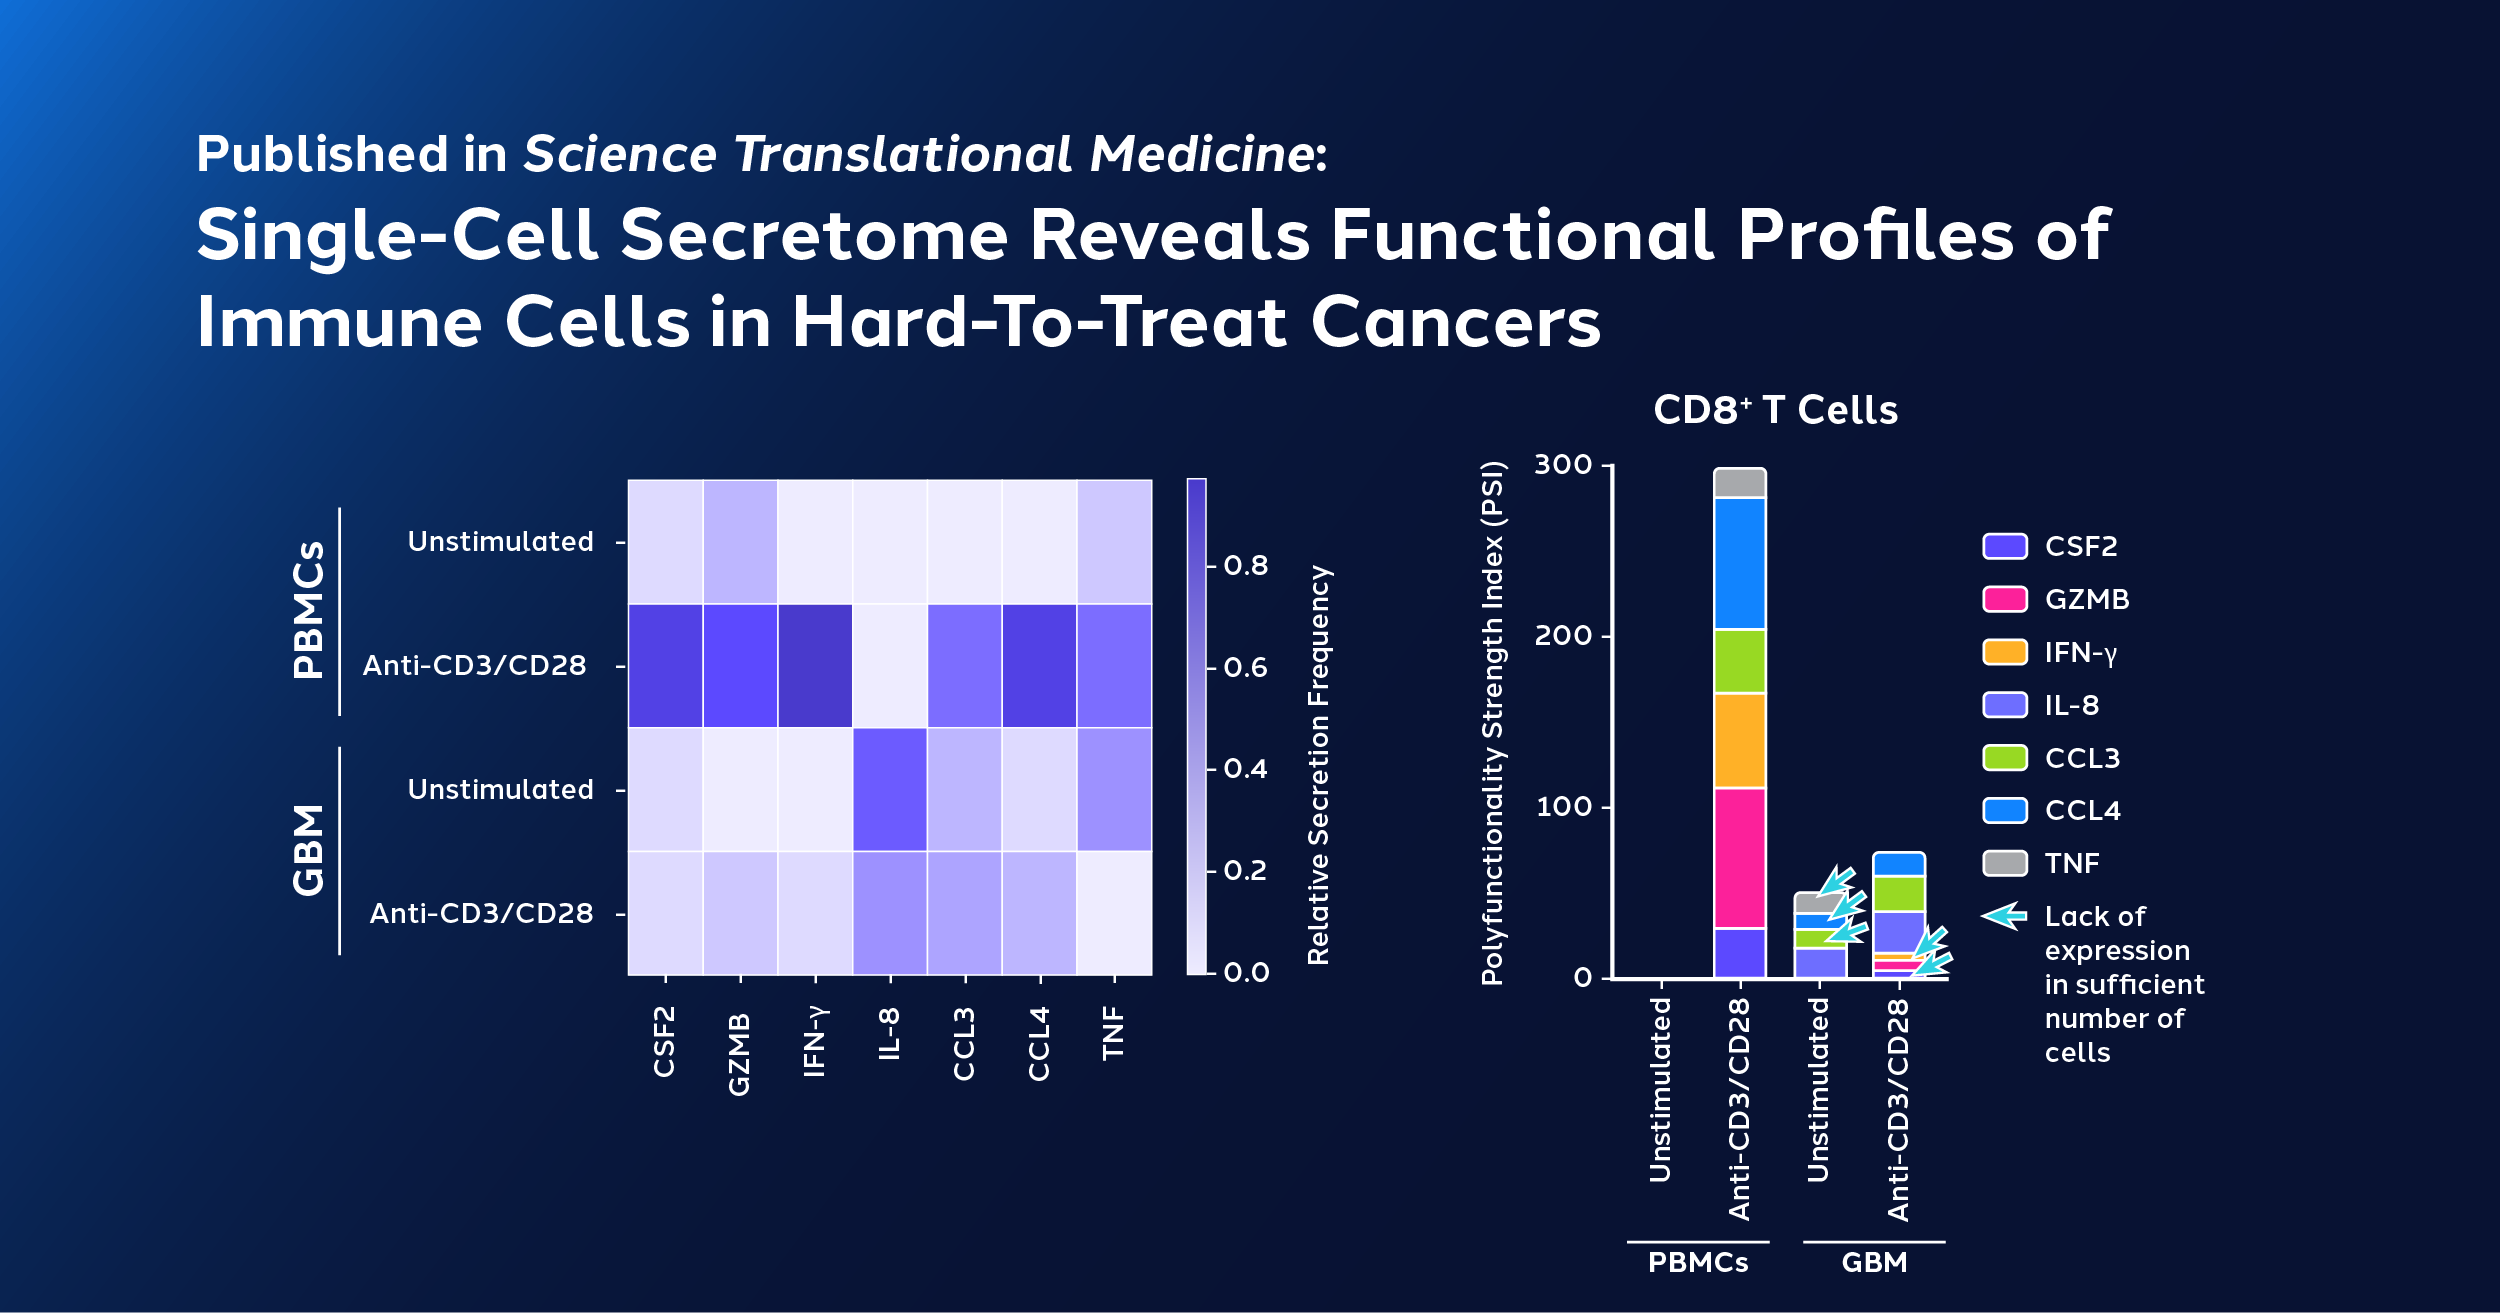 Blog Post_Single-Cell Secretome Reveals Functional Profiles of Immune Cells in Hard-To-Treat Cancers_jt-01